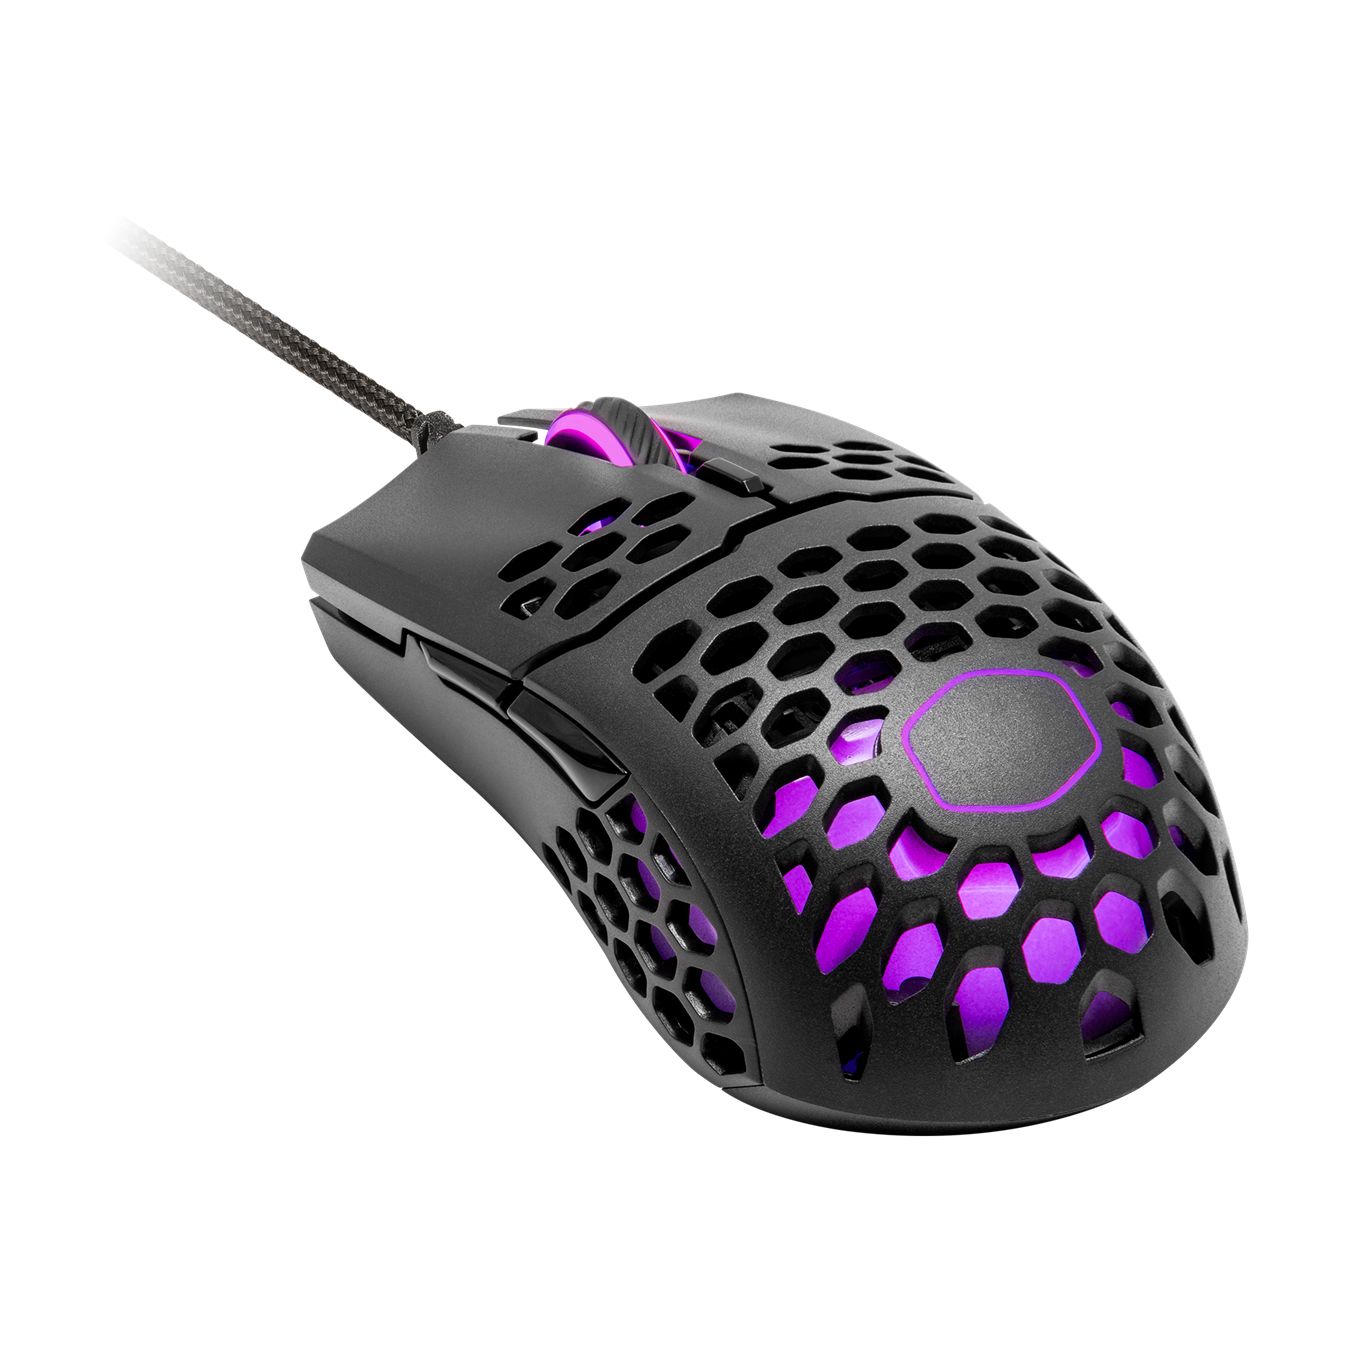 MM711 LITE Gaming Mouse - New perforated housing is engineered to be supremely durable and lightweight, meaning you can play longer without fatigue